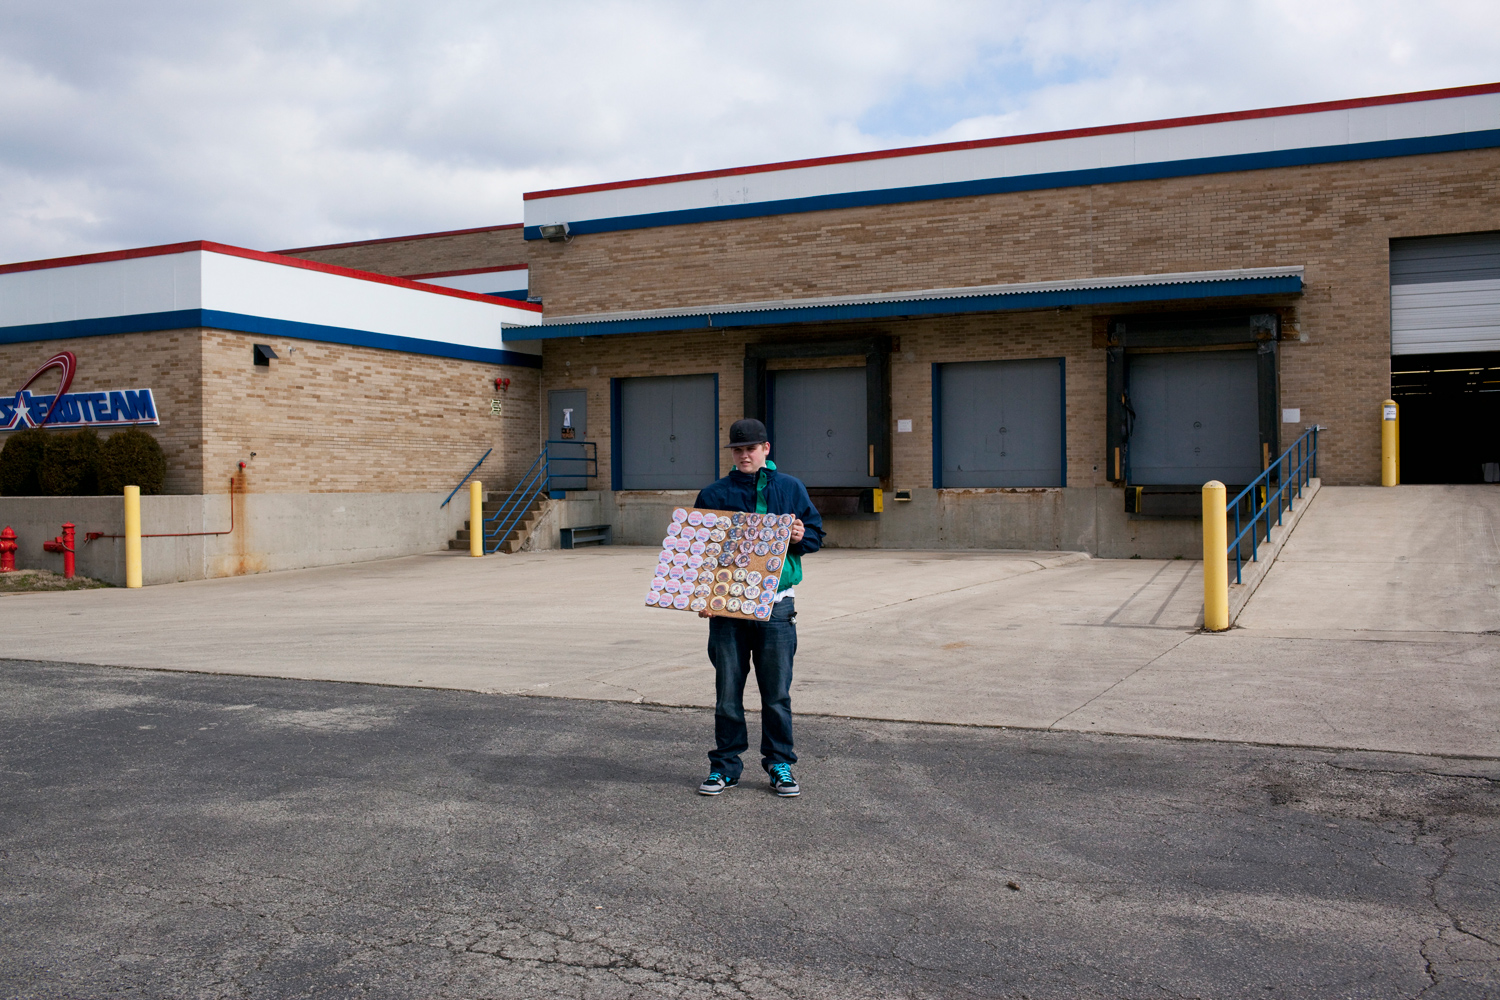 March 3, 2012. Campaign volunteer Ben Mulholland sells buttons outside a rally for Mitt Romney in Dayton, Ohio.